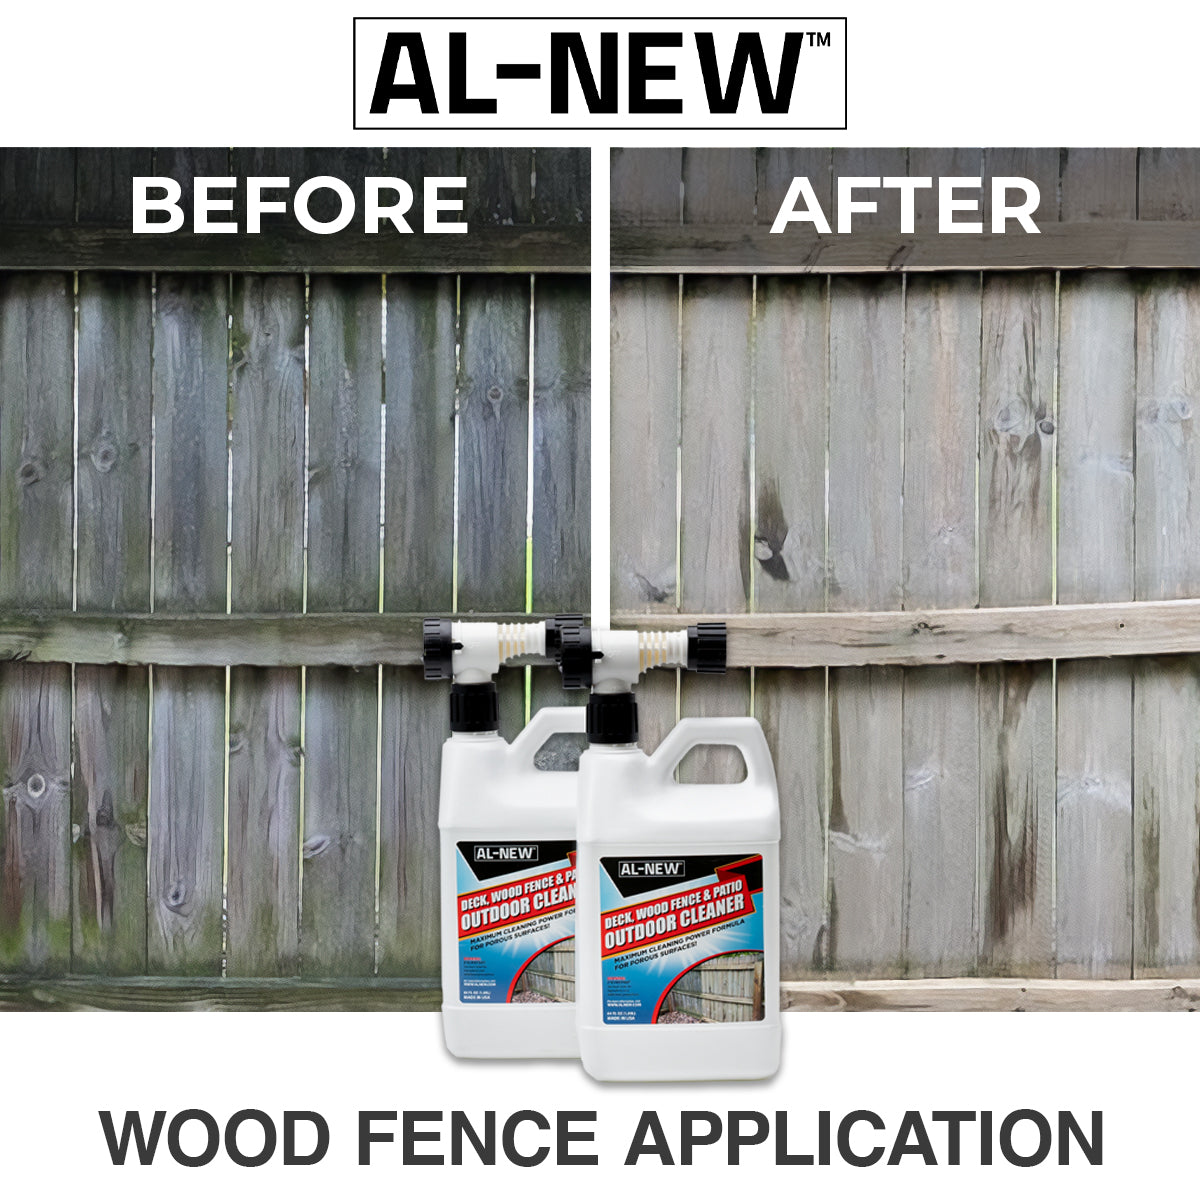 AL-NEW Outdoor Cleaner | Deck, Wood Fence, &amp; Patio 64oz Hose End Sprayer (Pack of 2)